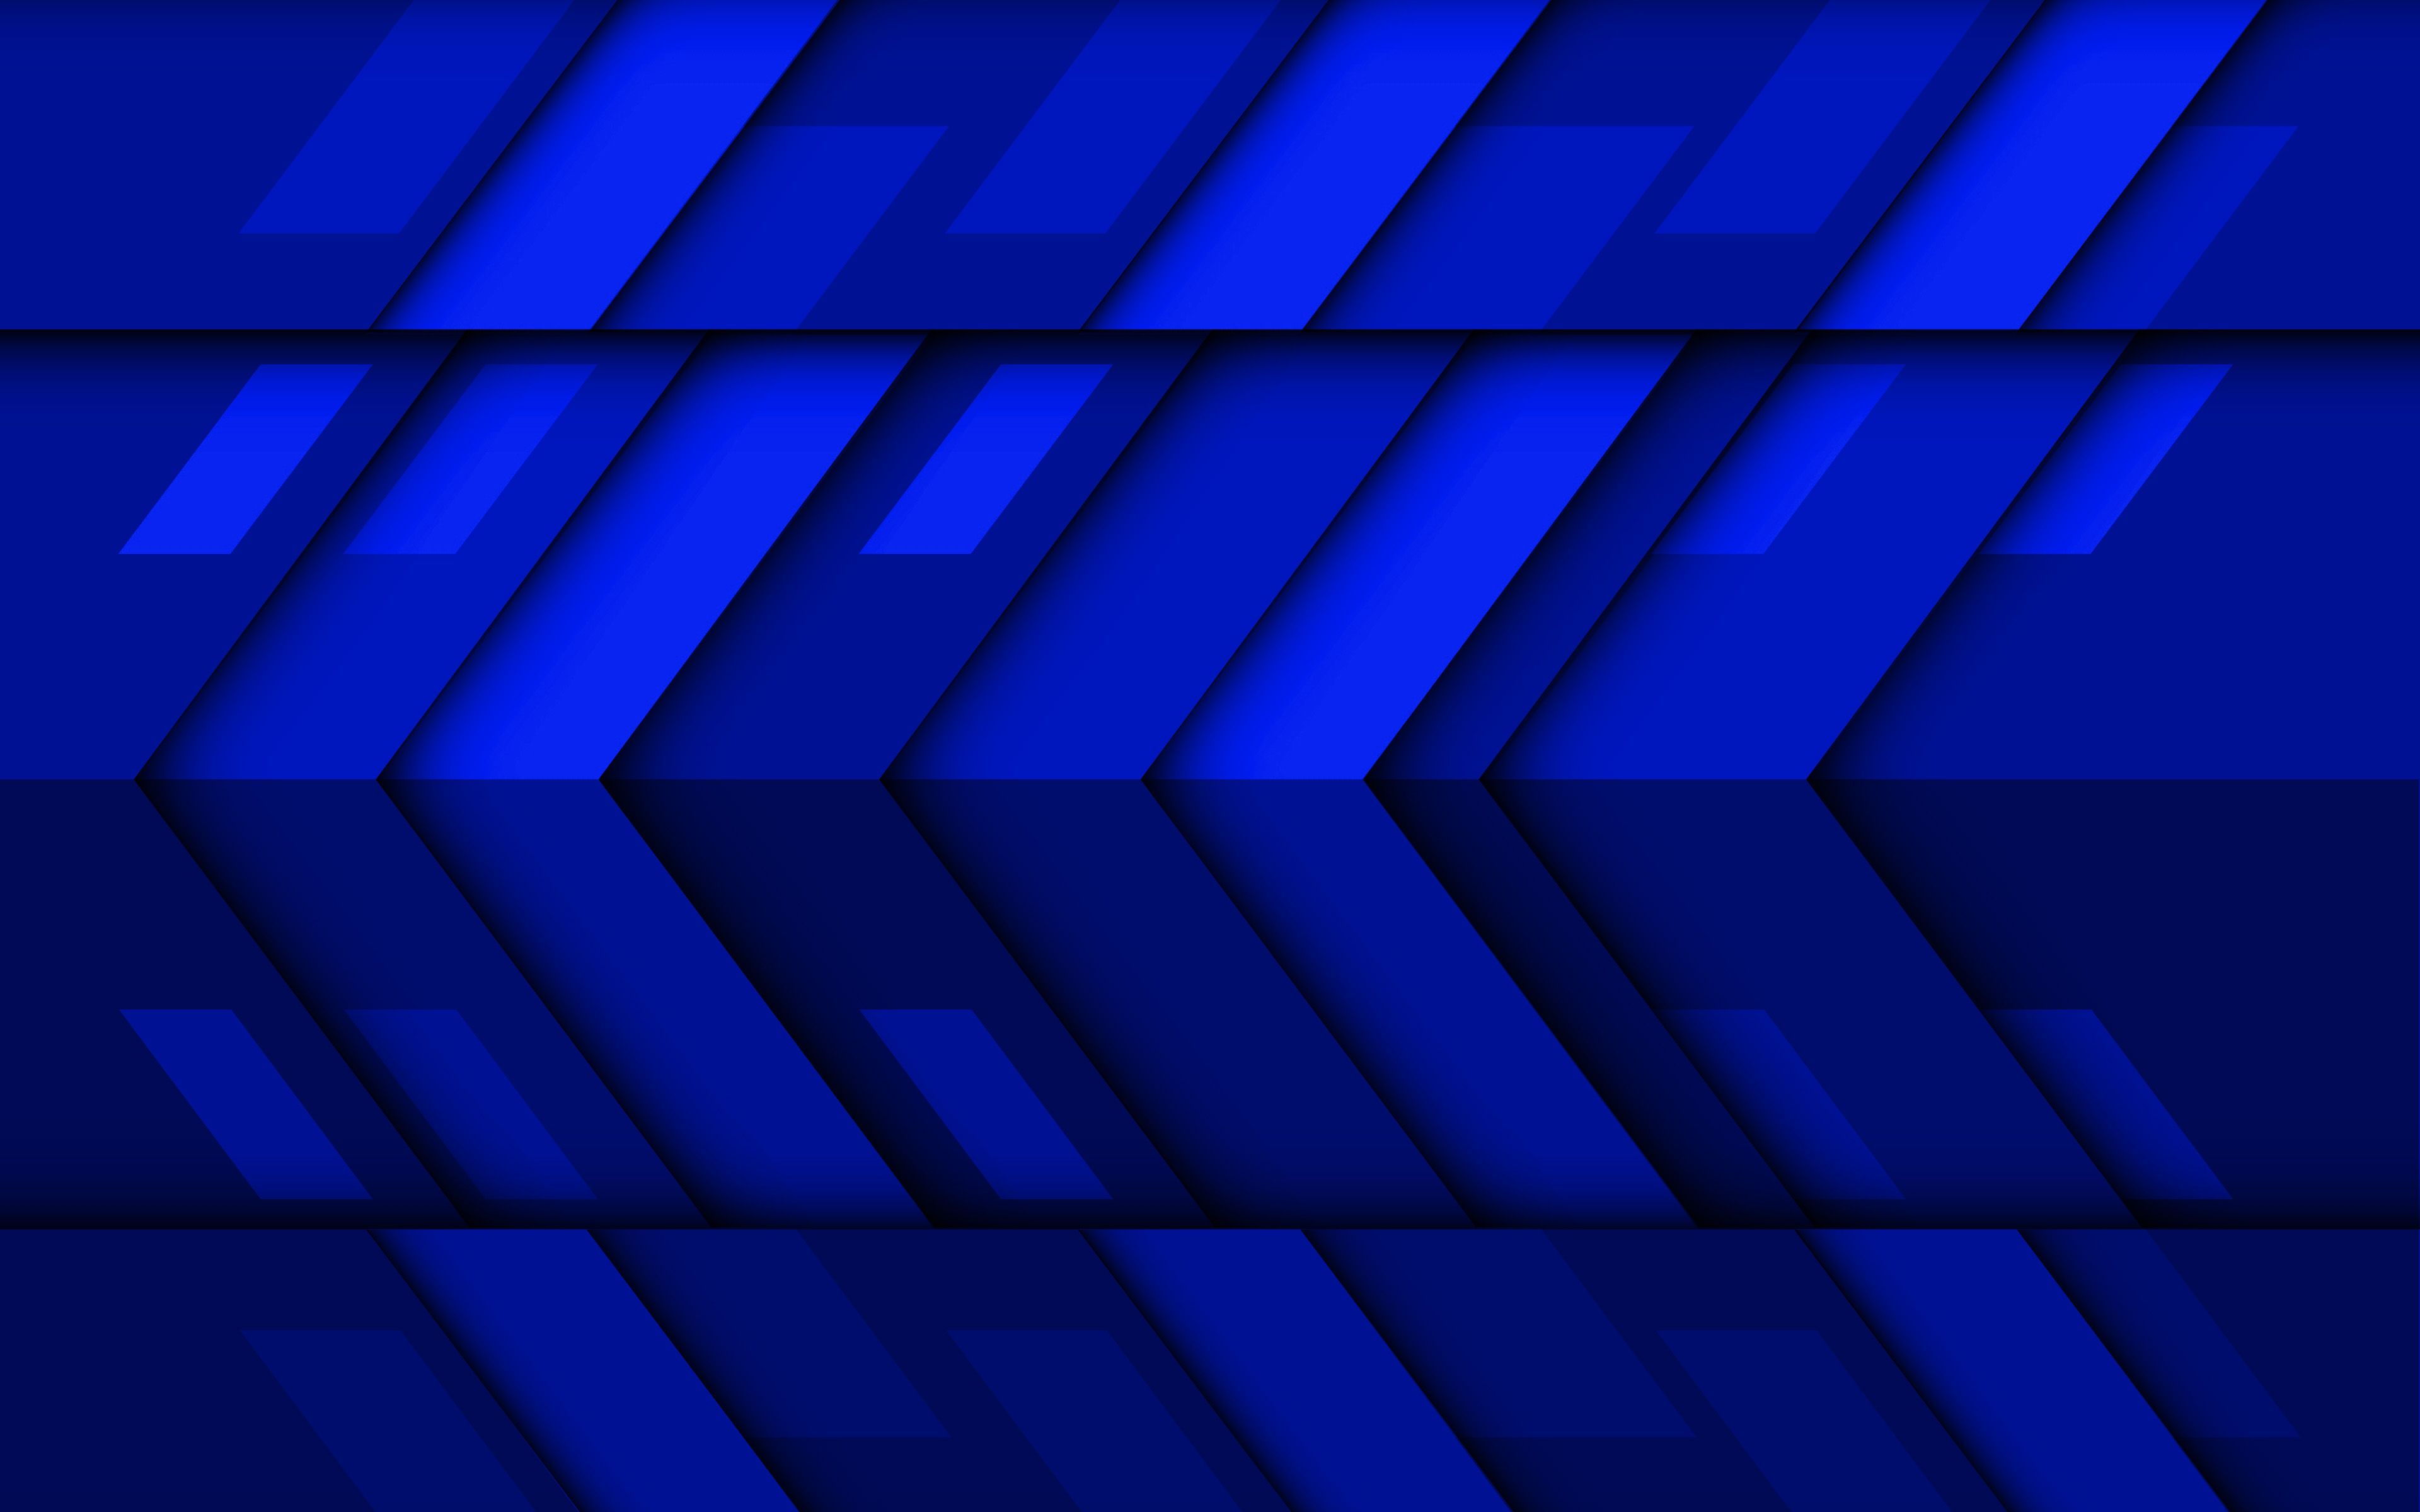 Blue Artistic Right Arrow Wallpapers